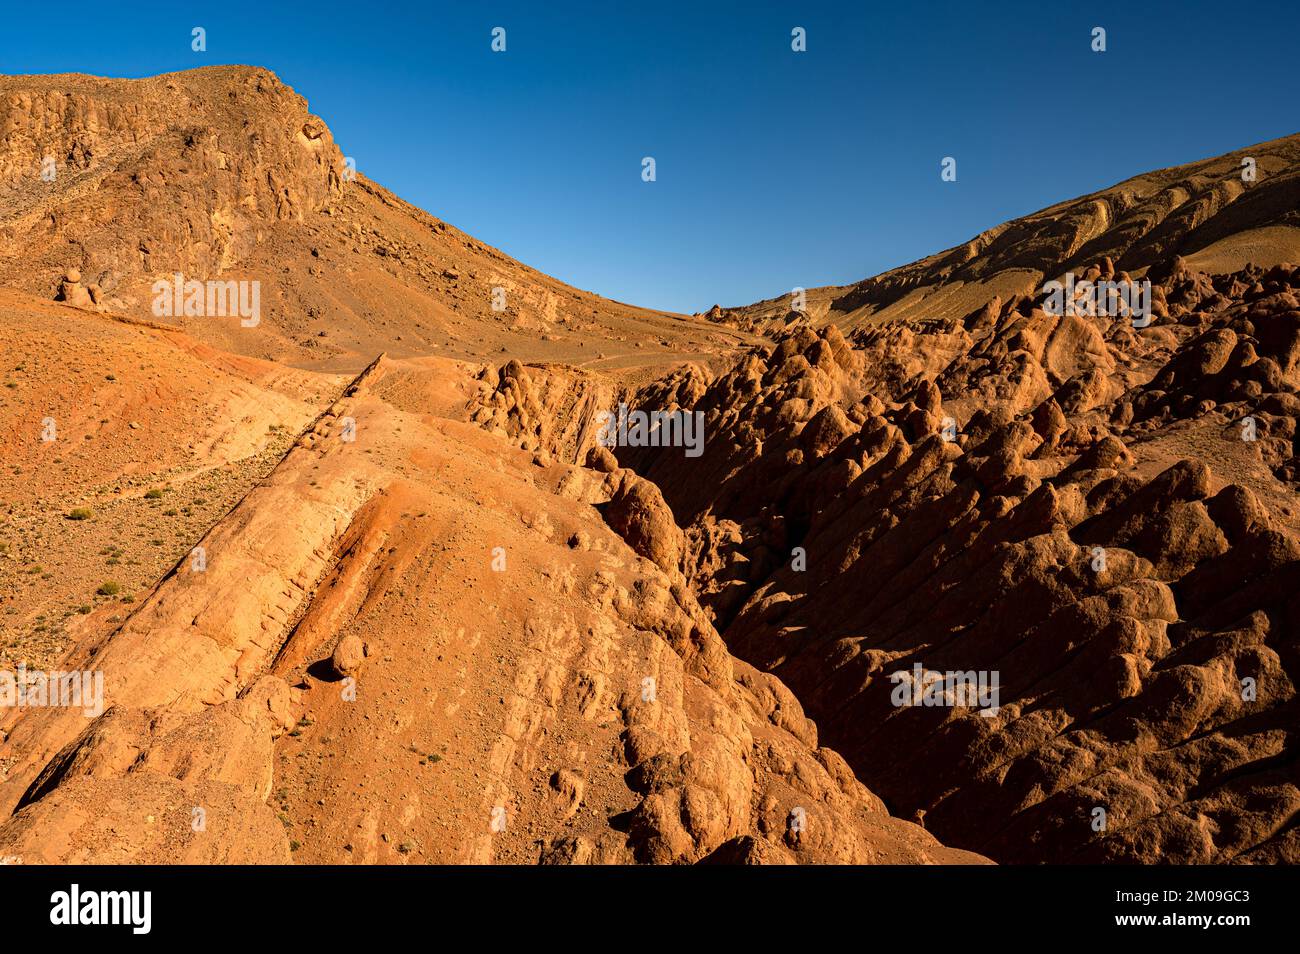 Desert mountains landscape in the vicinity of Dades Gorges, Boumalne Dades, Morocco. Stock Photo